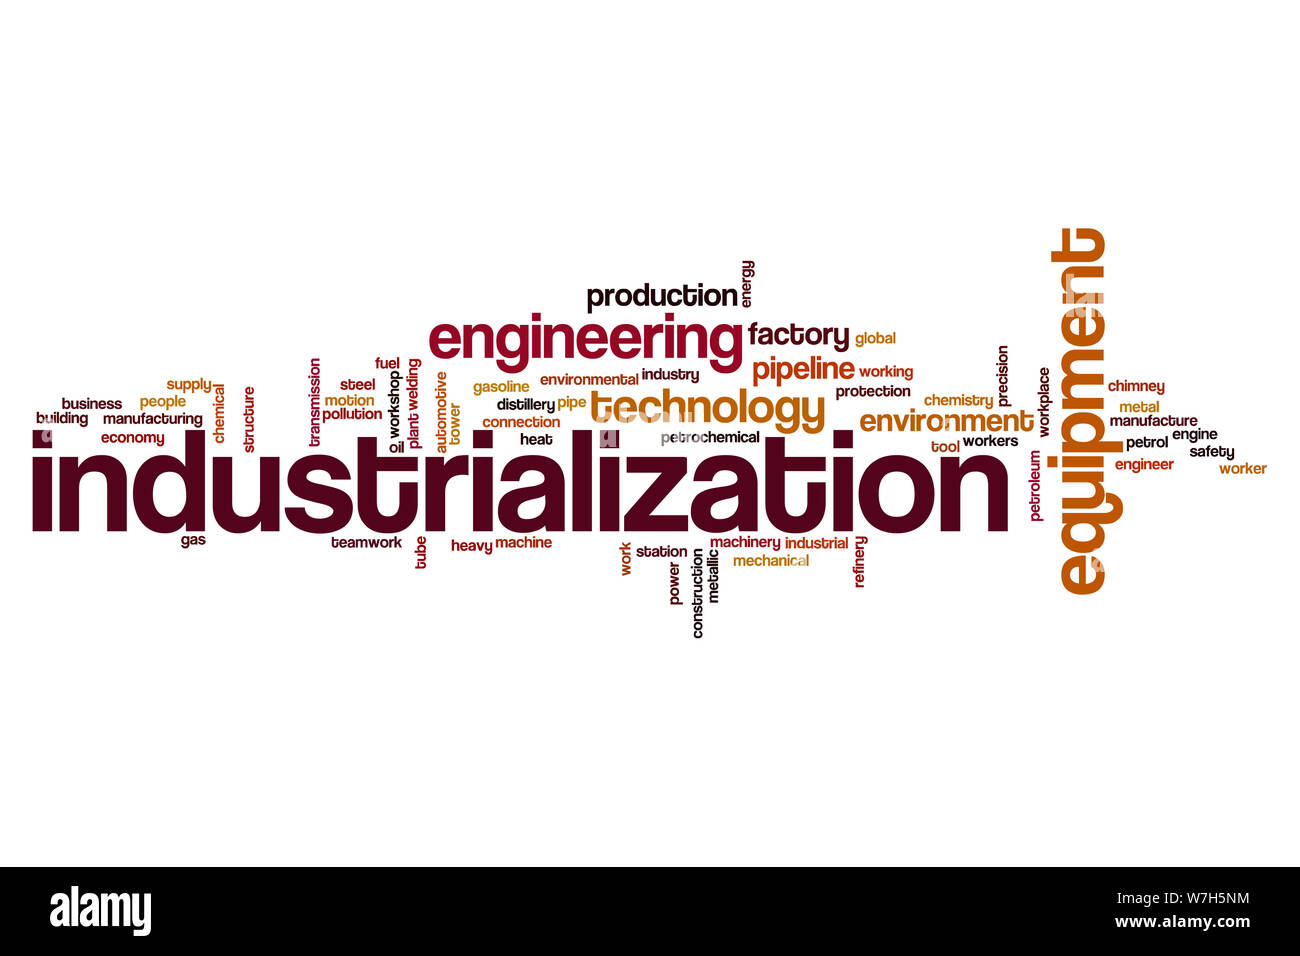 Industrialization word cloud concept Stock Photo